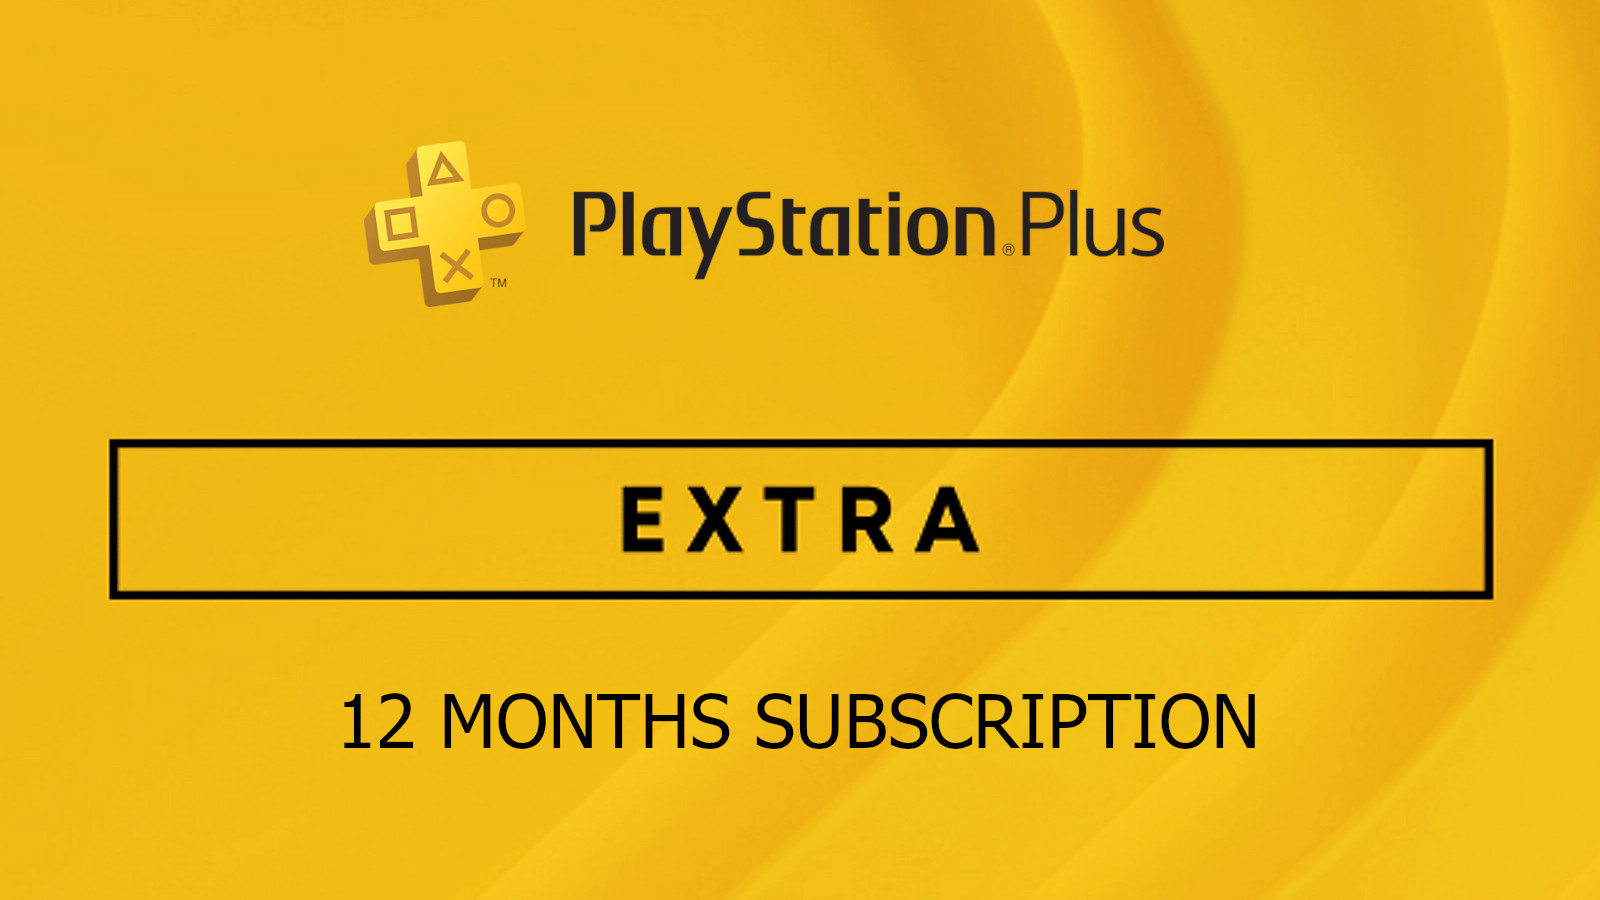 PlayStation Plus Extra 12 Months Subscription ACCOUNT, 94.23 usd